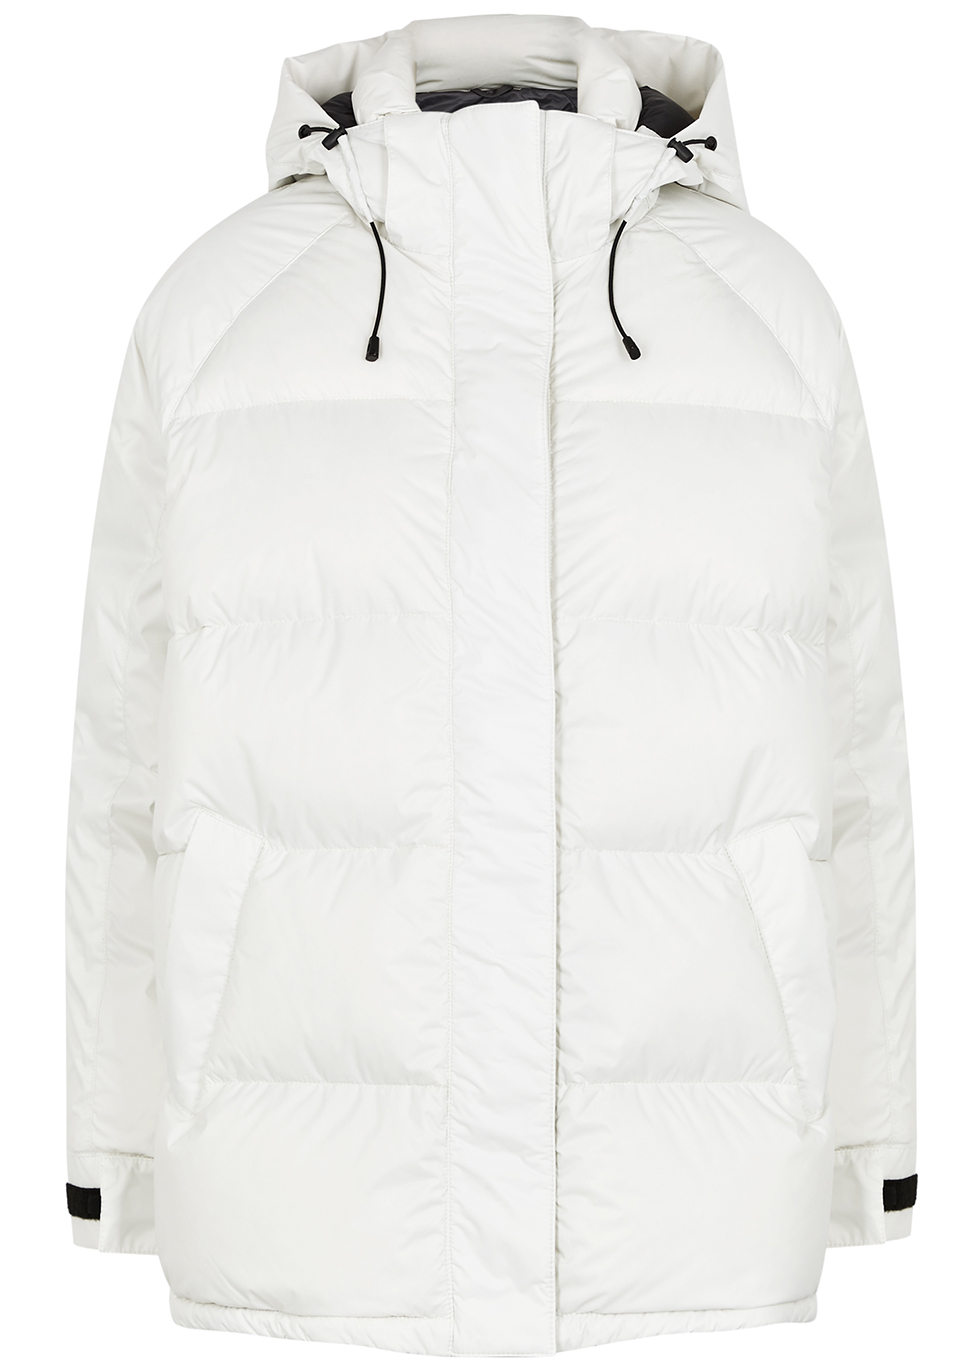 Approach off-white quilted shell jacket